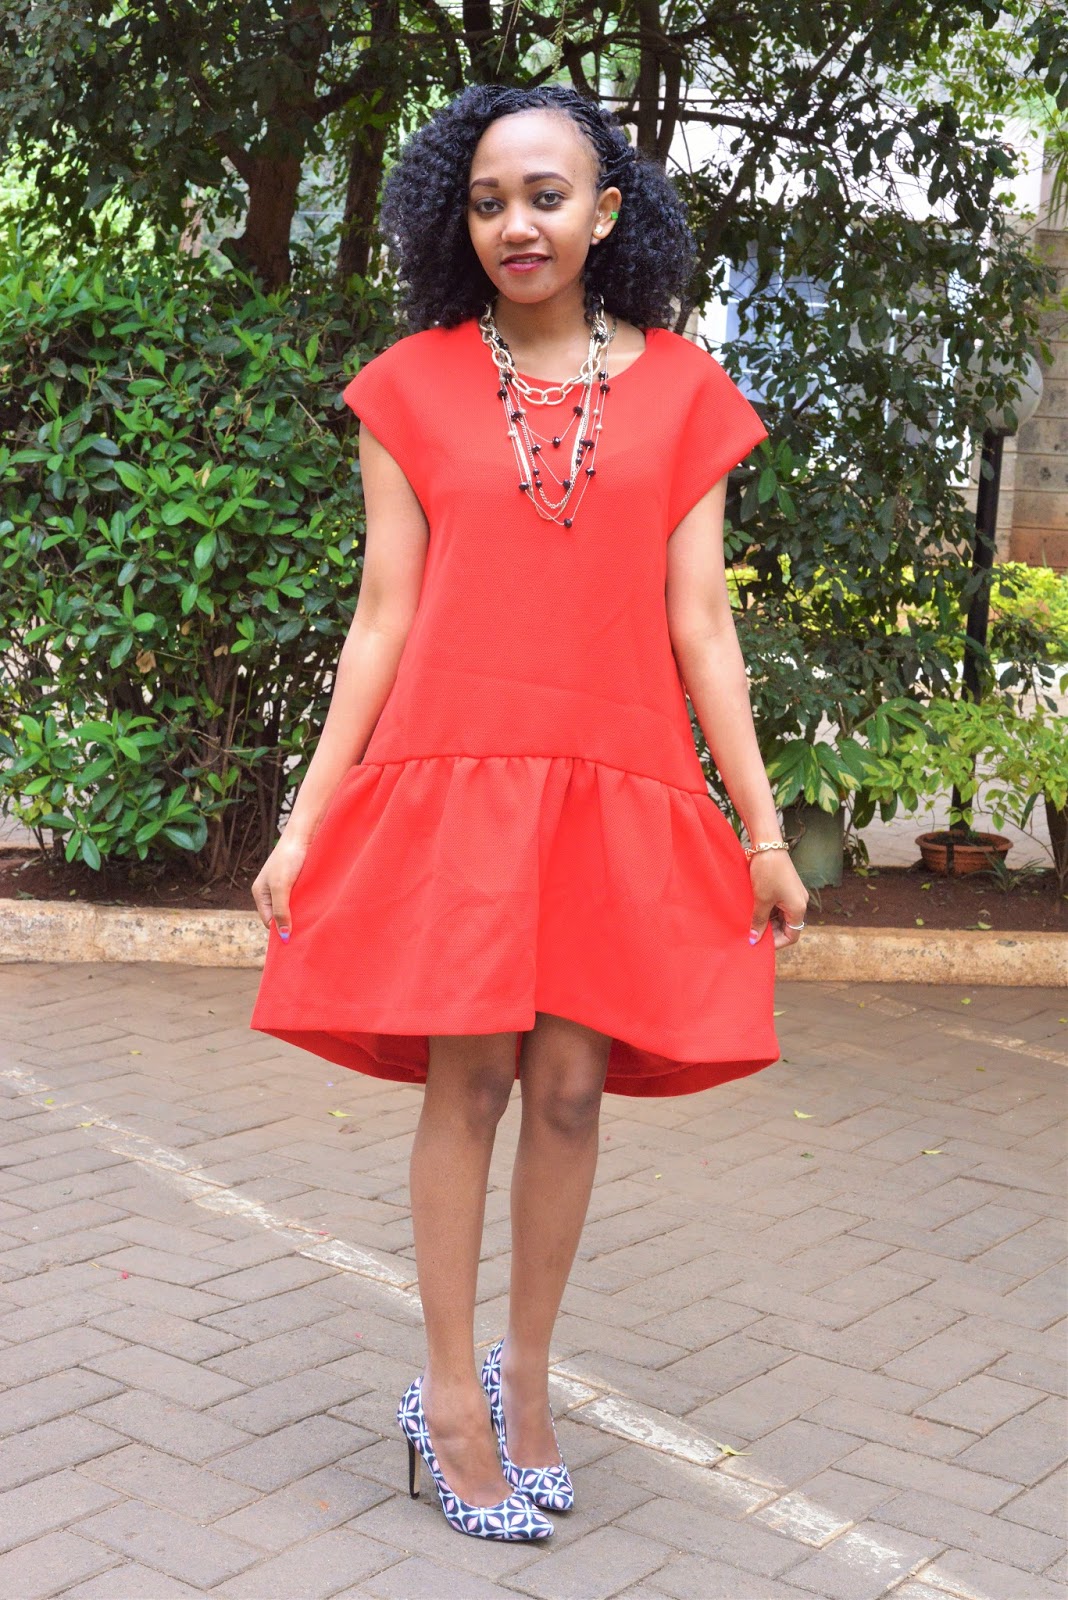 THE RED RUFFLE DRESS